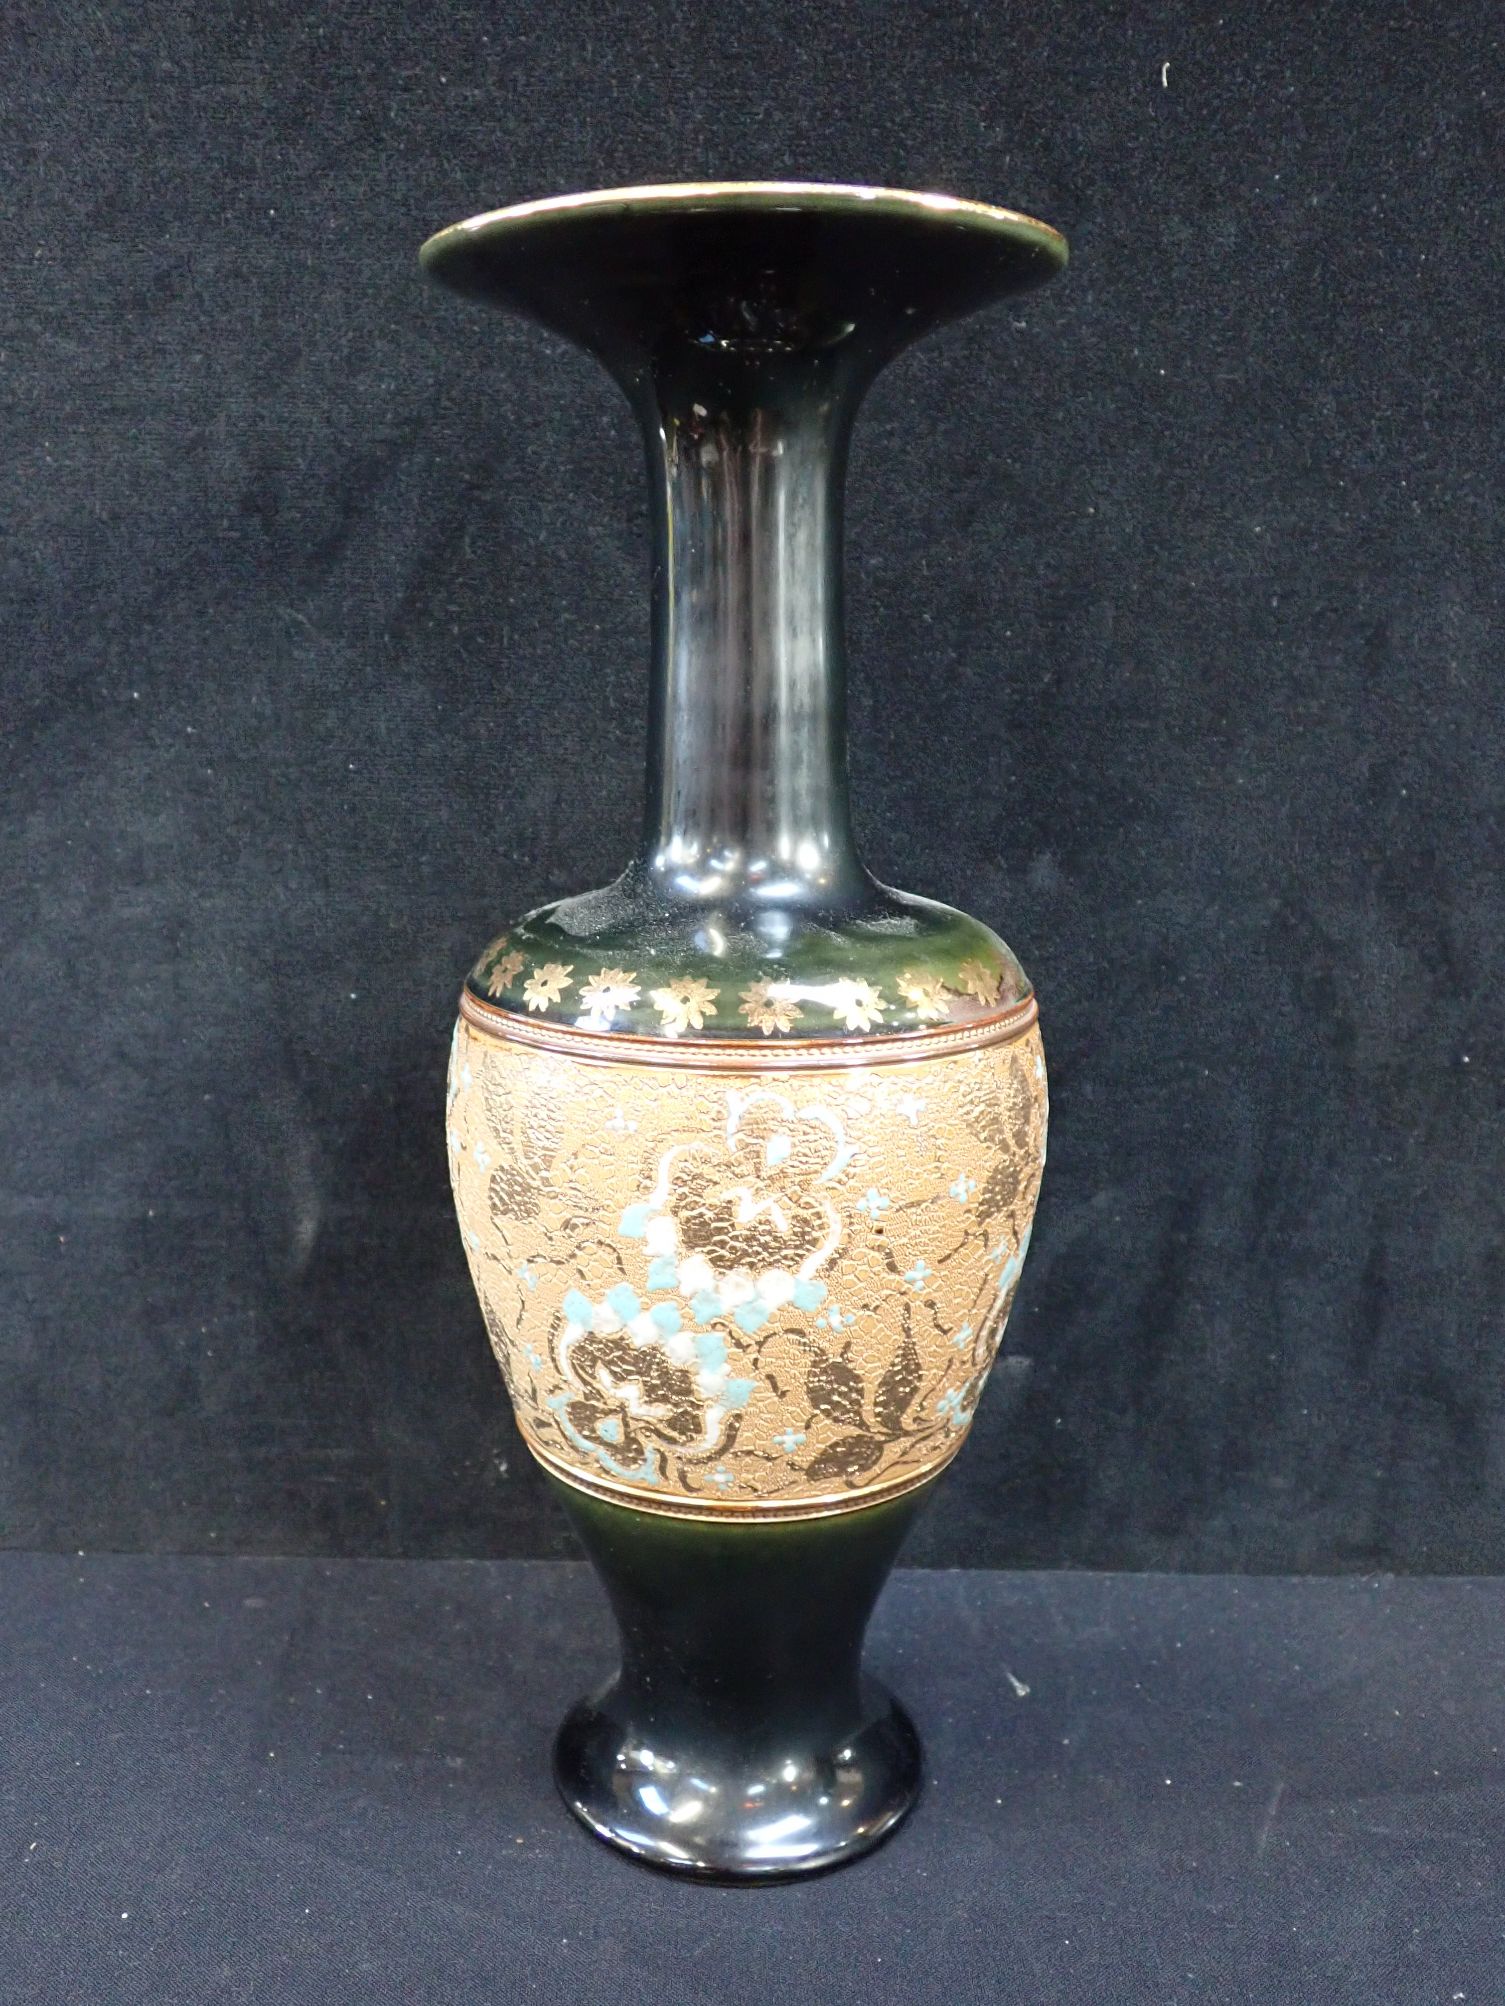 A PAIR OF ROYAL DOULTON SLATER'S PATENT VASES - Image 2 of 5